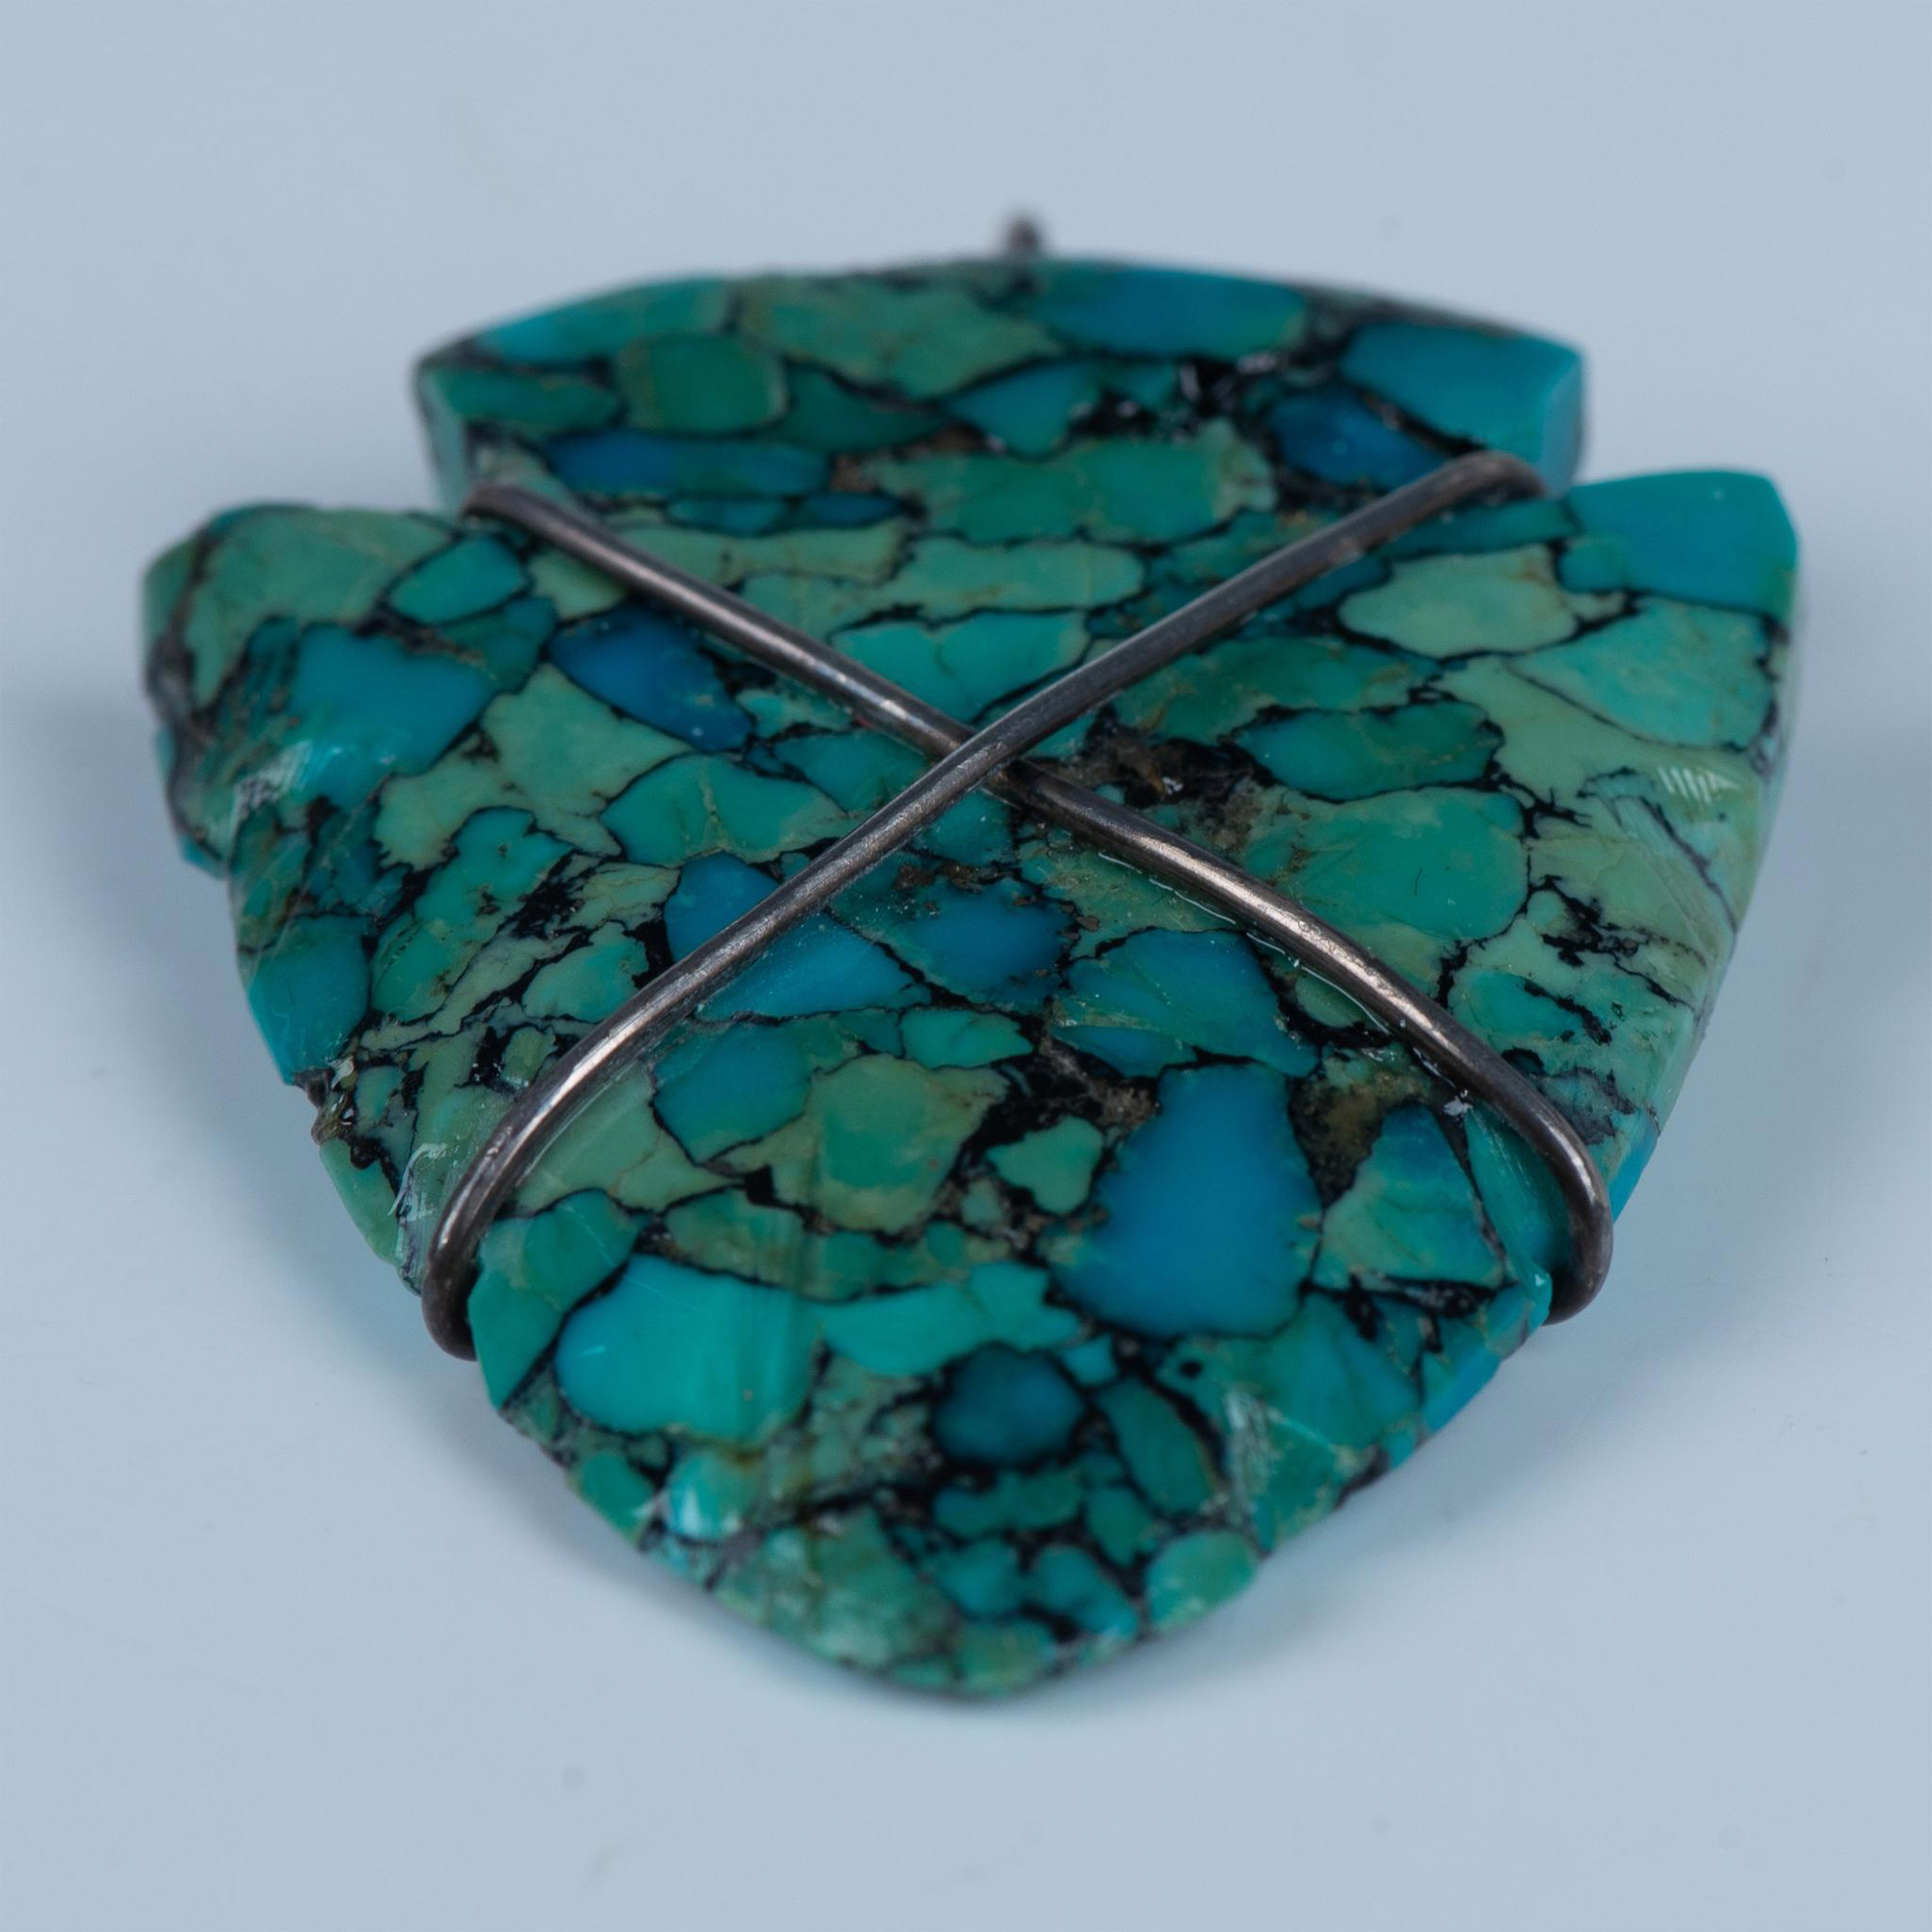 Southwestern Carved Turquoise Arrow Head Pendant - Image 3 of 4